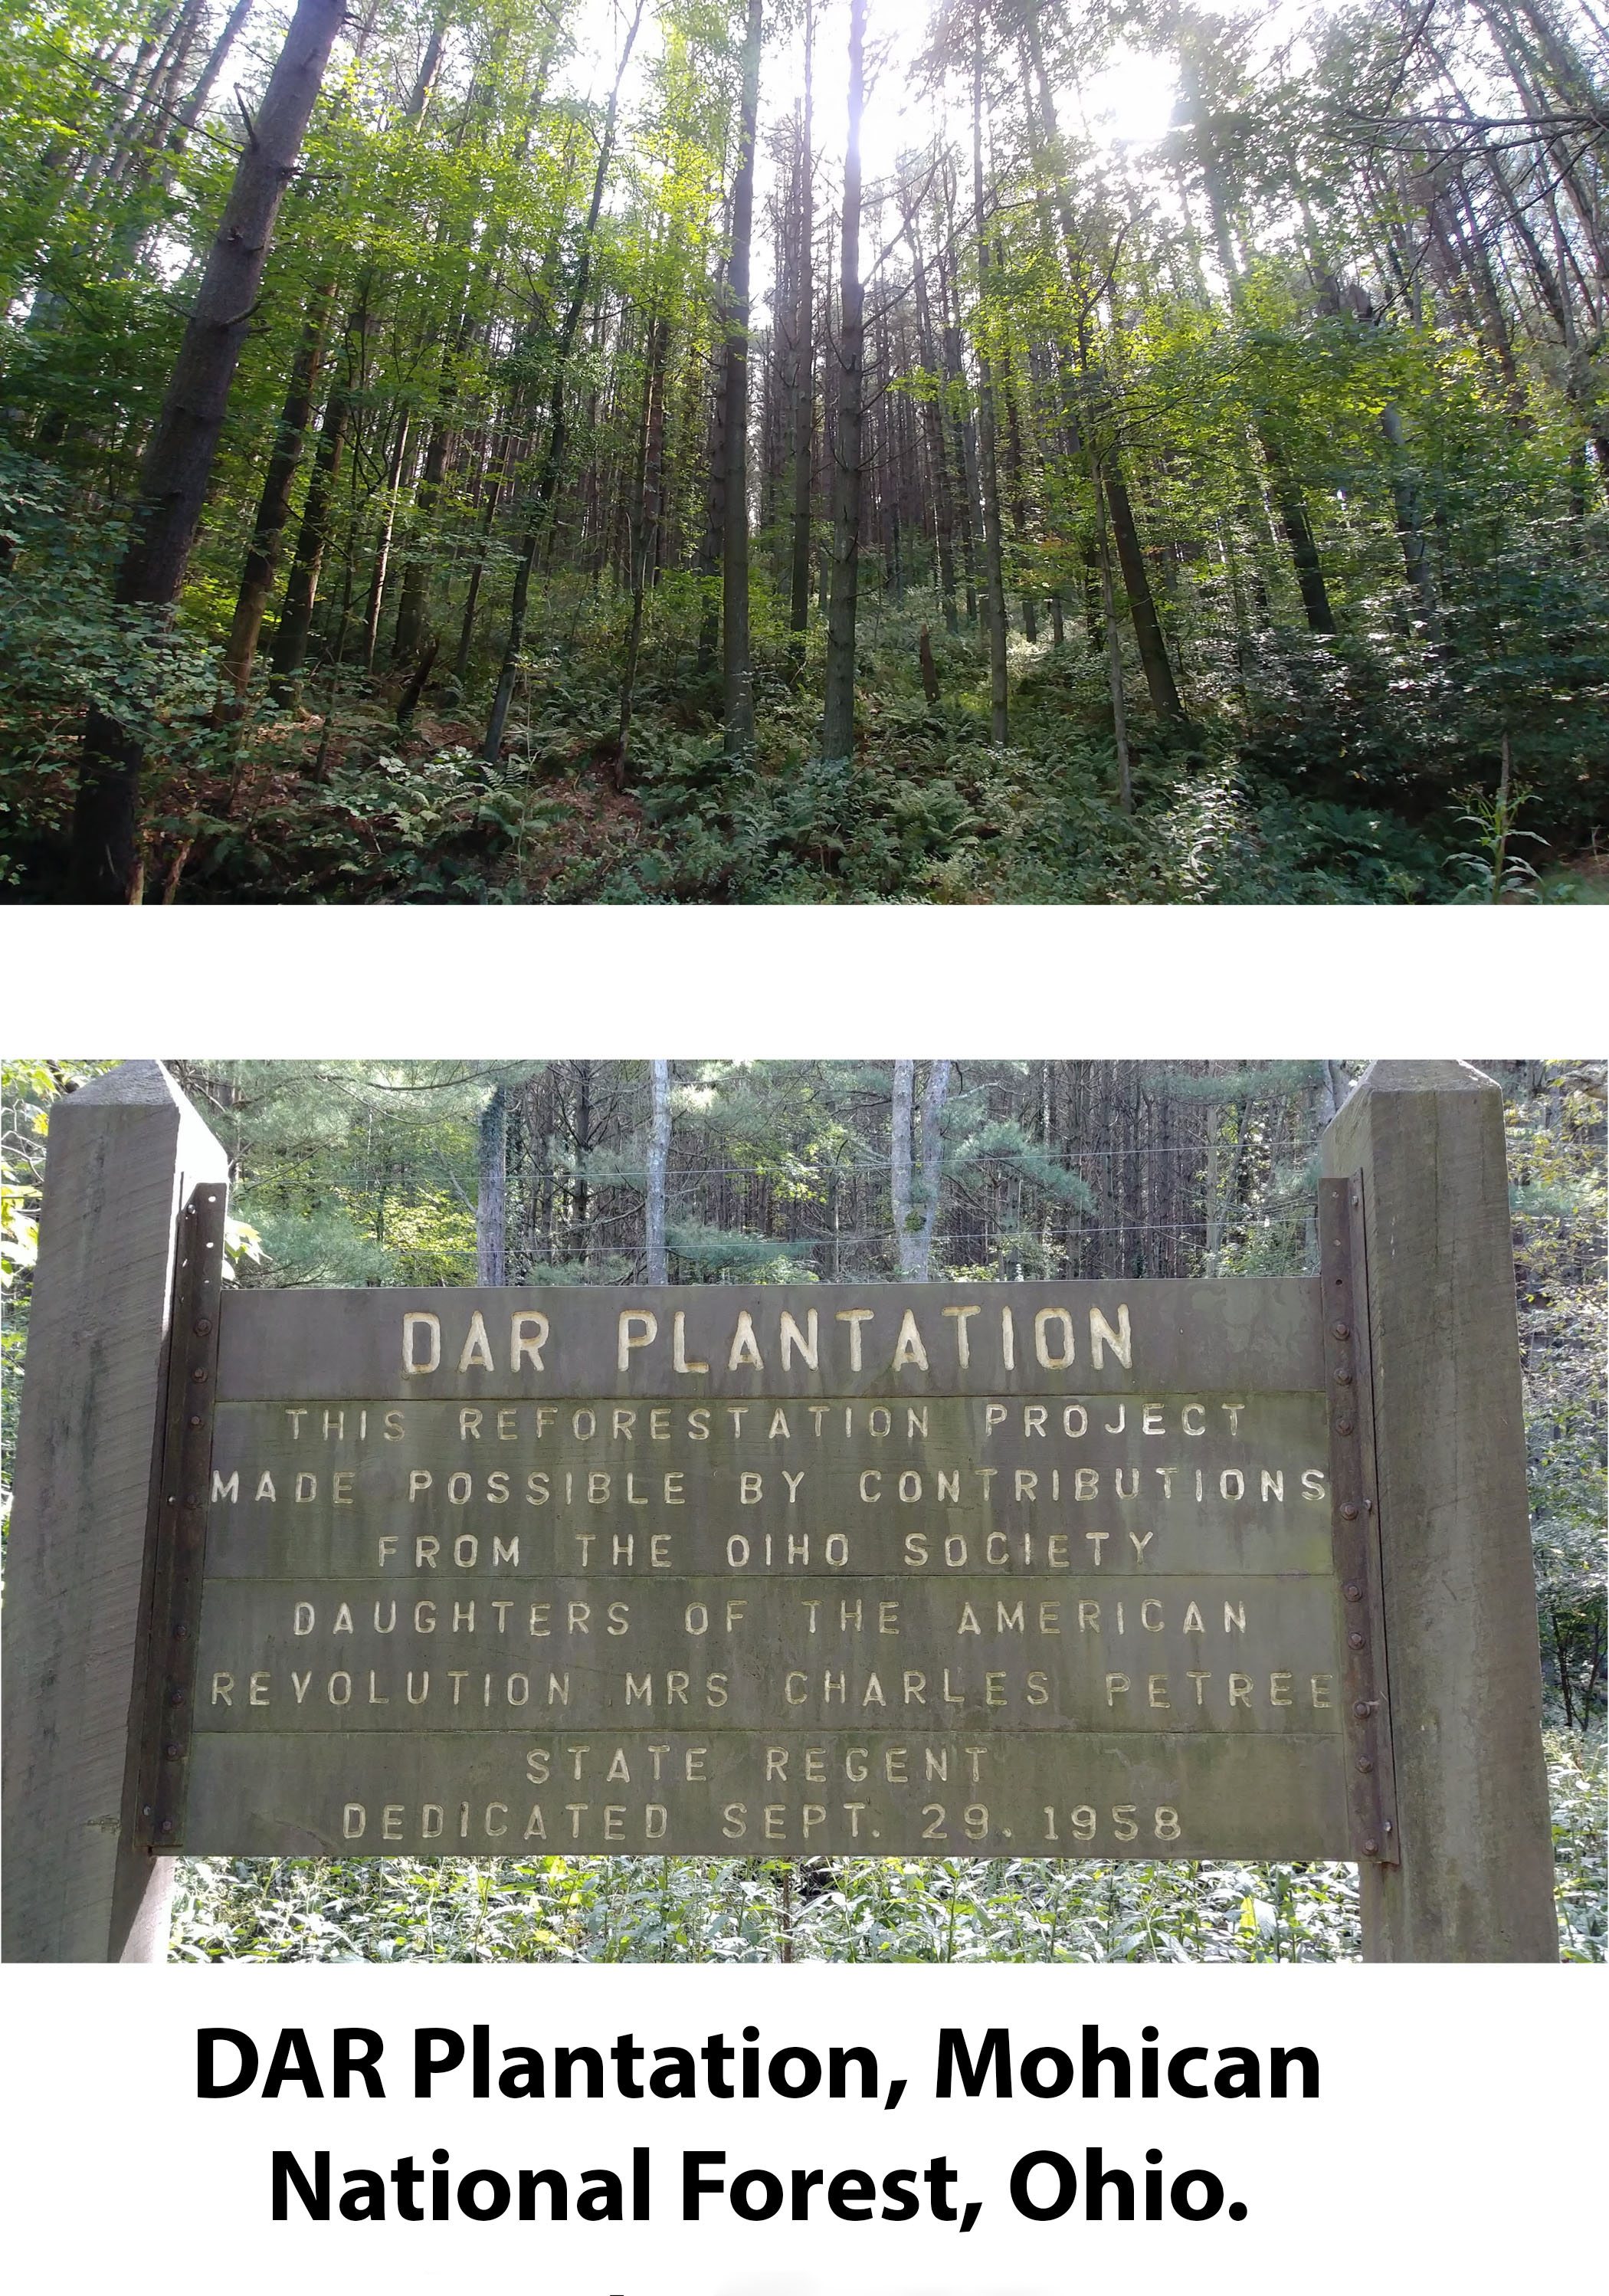 DAR Plantation at Mohican National Forest